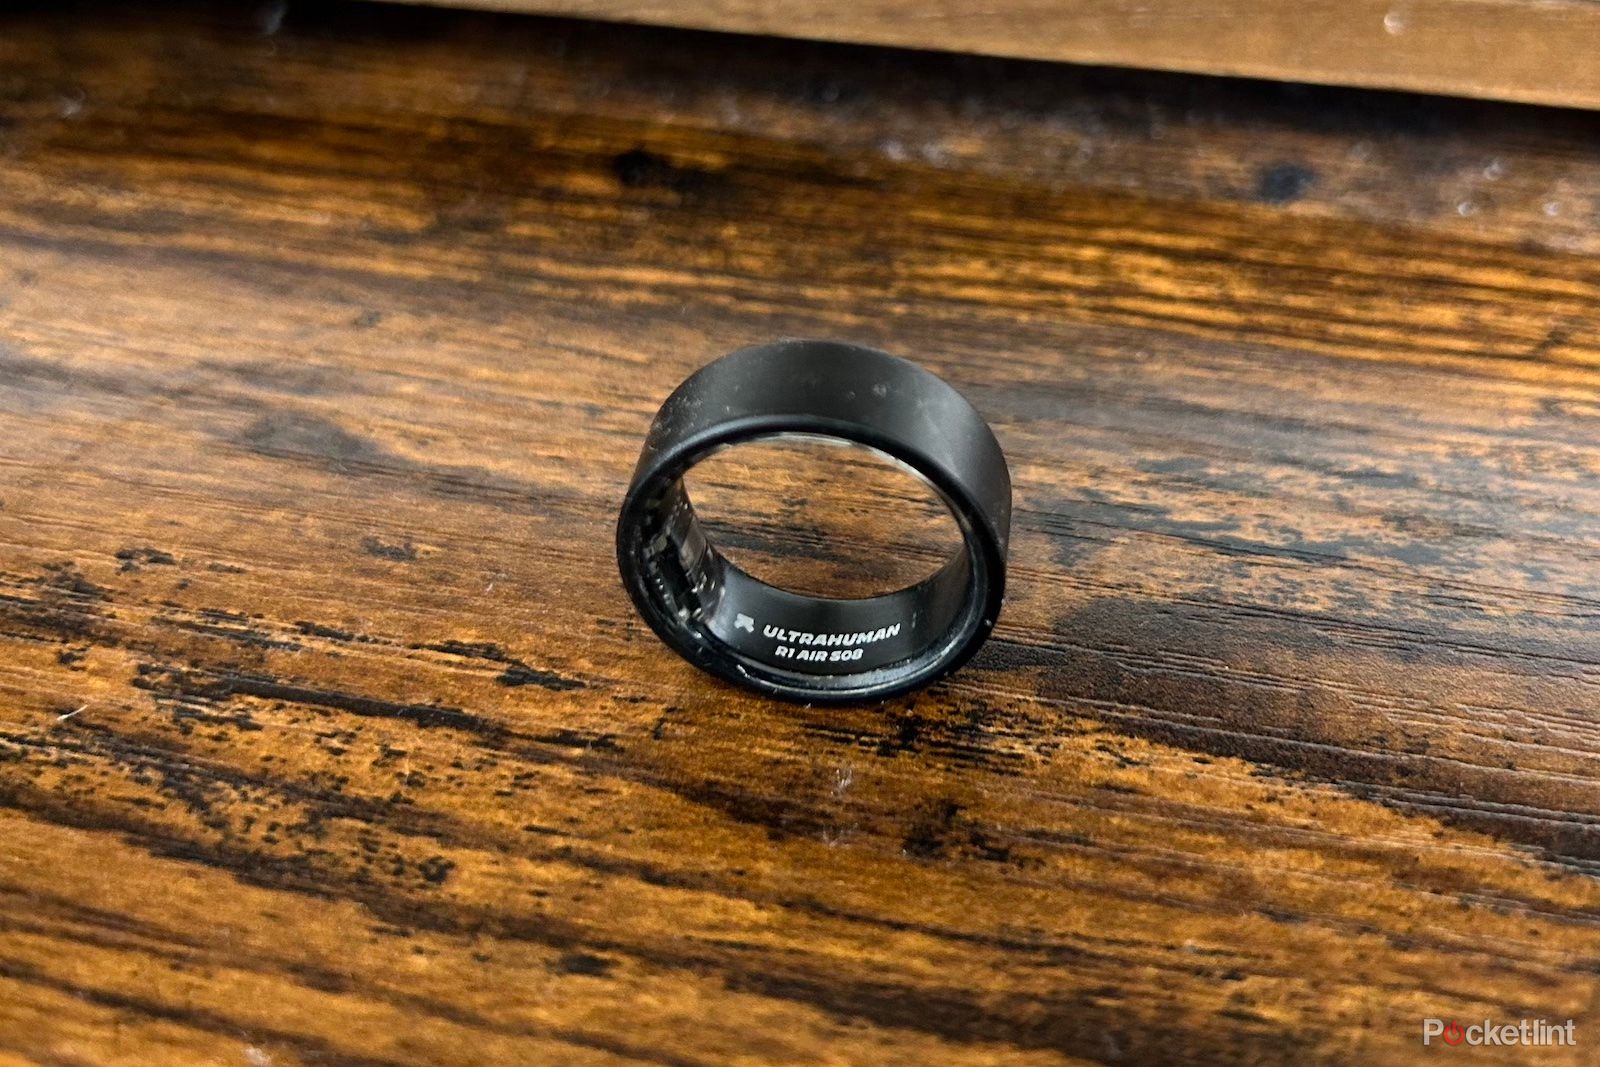 Ultrahuman Ring Air review - Wareable